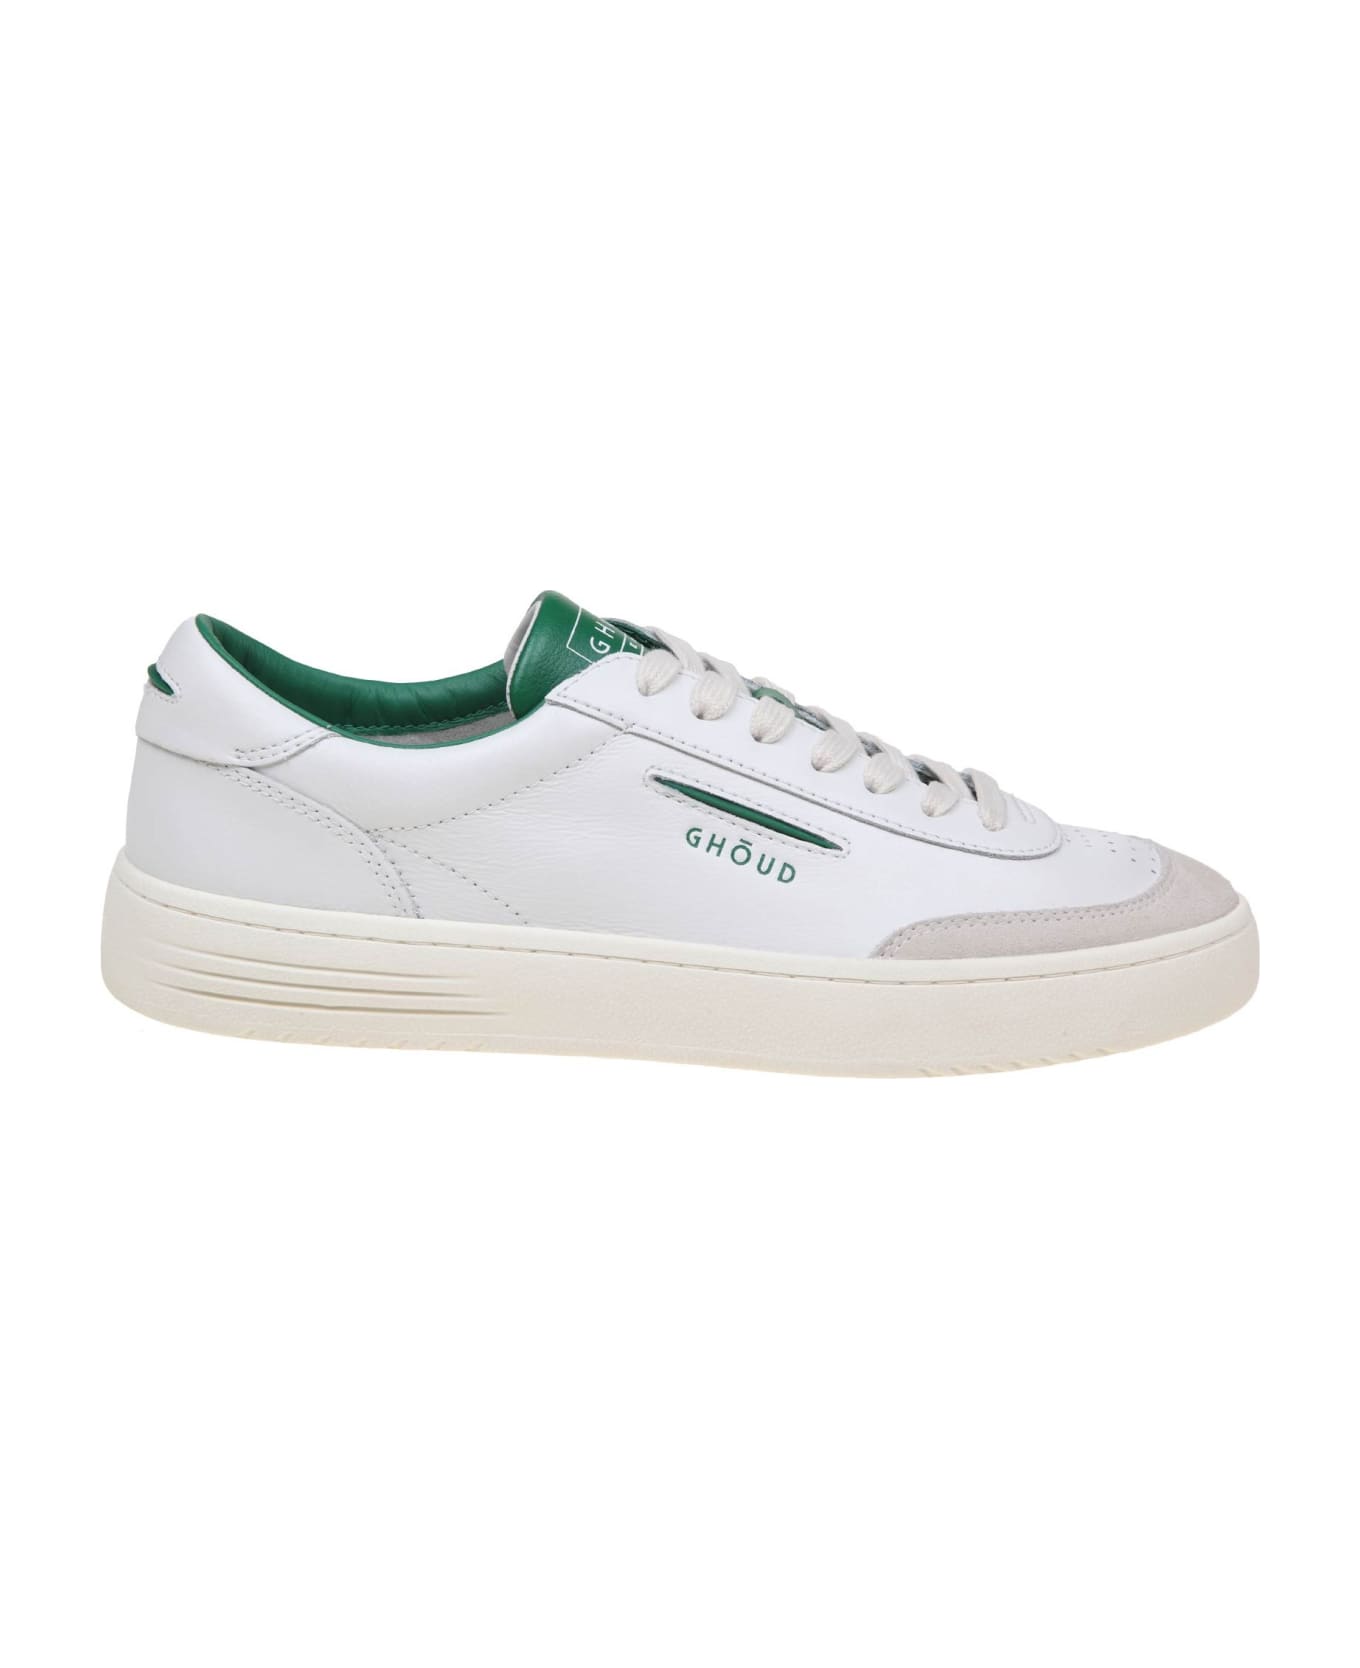 GHOUD Lido Low Sneakers In White/green Leather And Suede - leat/suede wht/grn